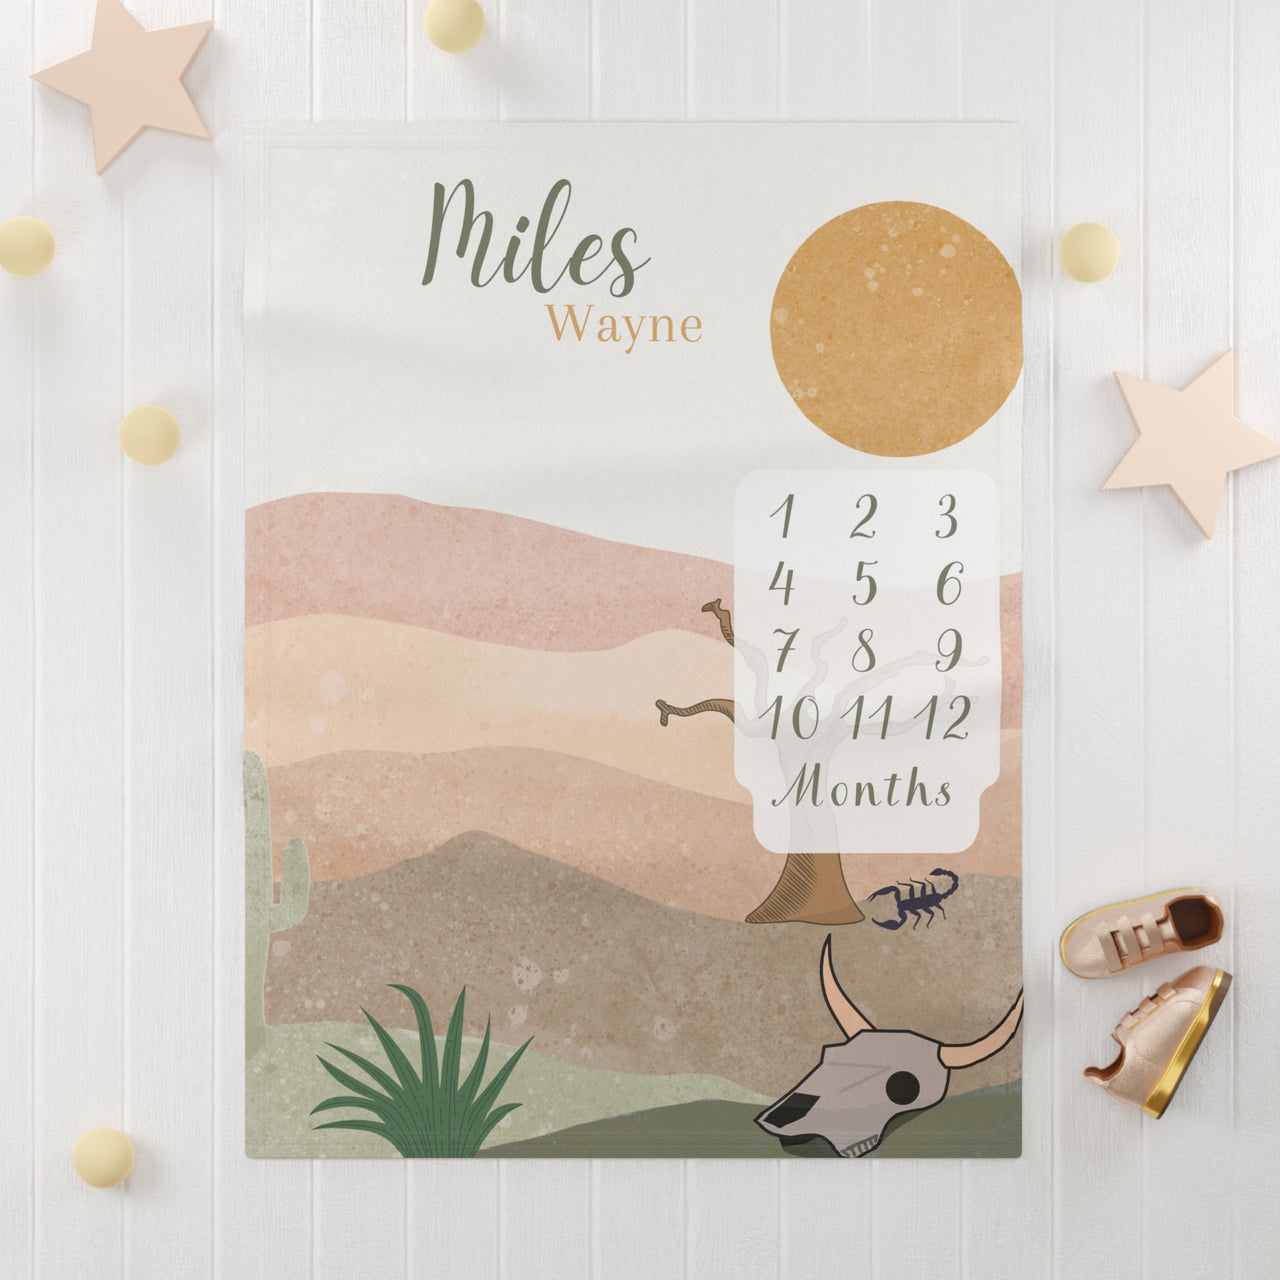 Desert Chic Butterfly Themed Soft Fleece Milestone Blanket, Boys Monthly Growth Tracker, Personalized Baby Blanket, Baby Shower Gift